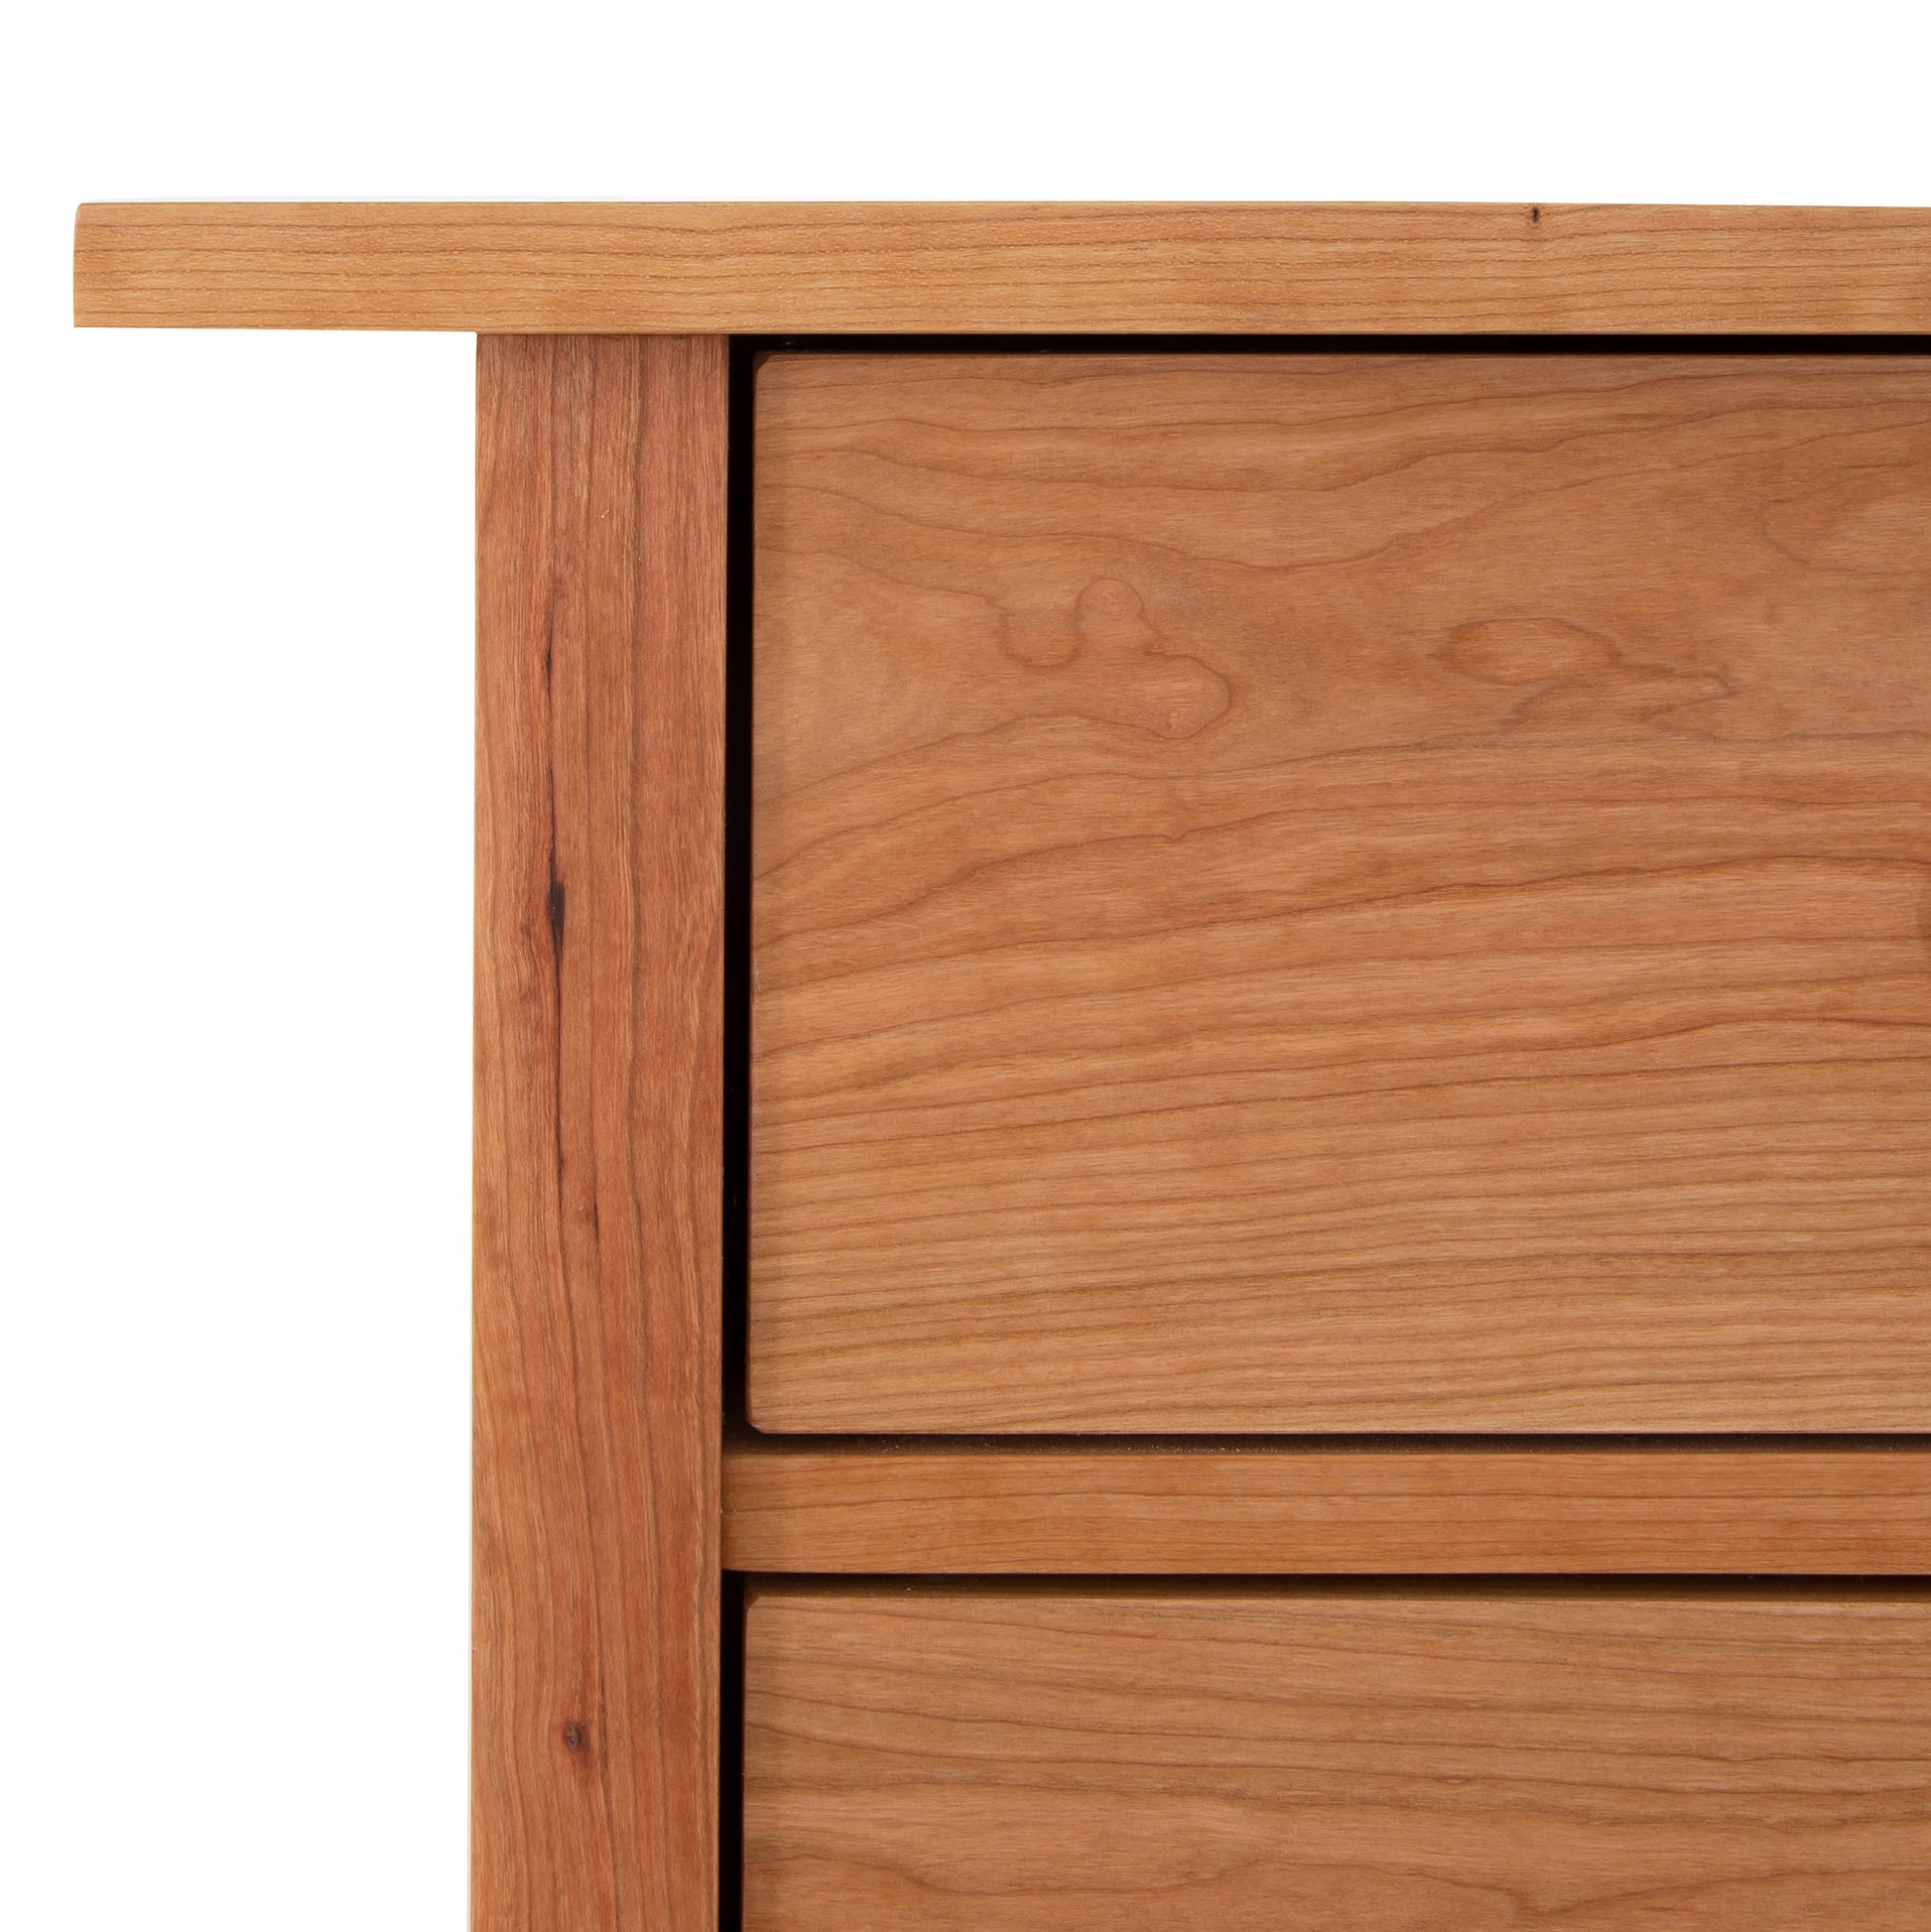 A close up of a Vermont Furniture Designs Burlington Shaker 7-Drawer Chest.